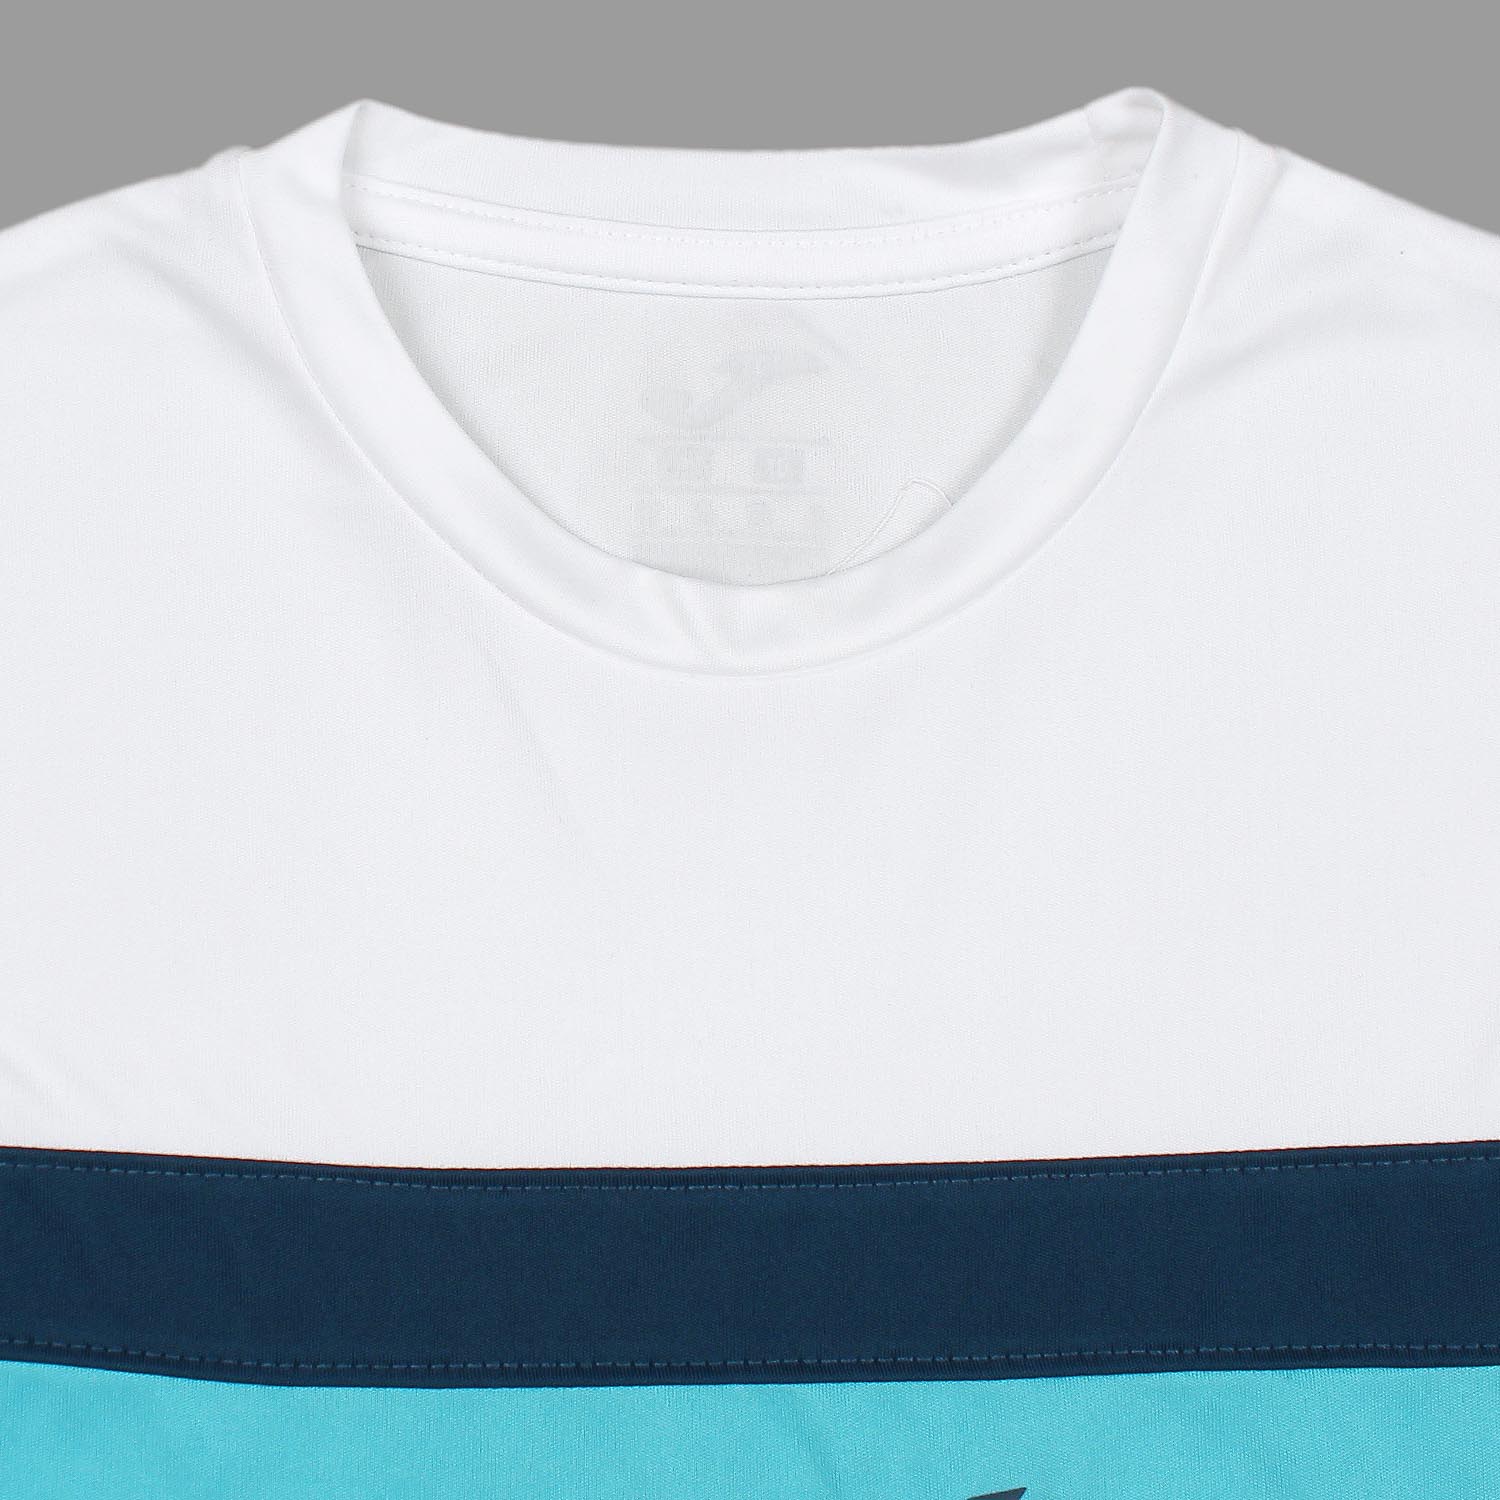 Joma Polyester Cyclone T-shirt For Men-MTST-2192White Turquoise